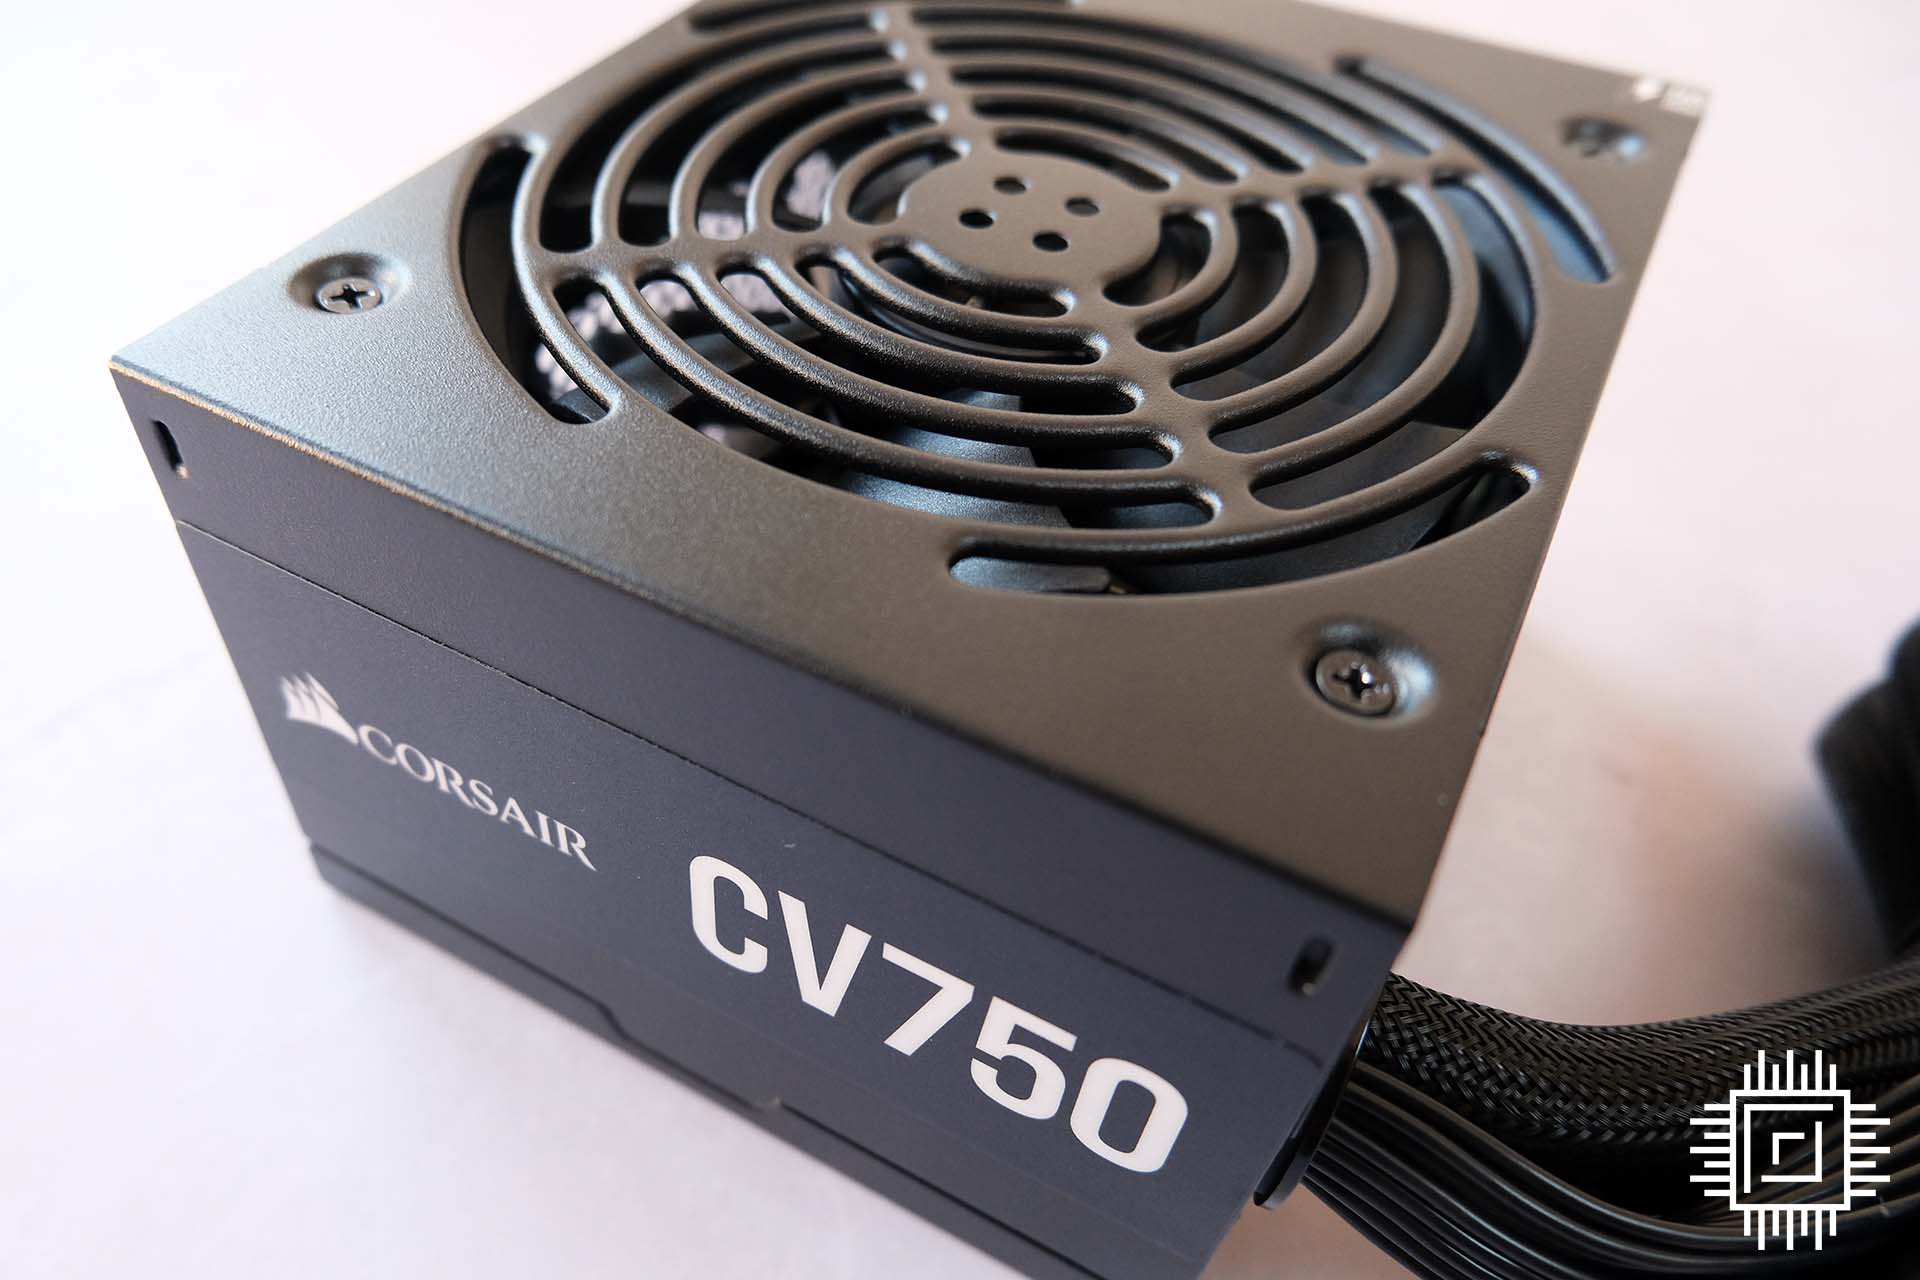 The Corsair CV750 PSU is a go-to workhorse for many well-priced systems.